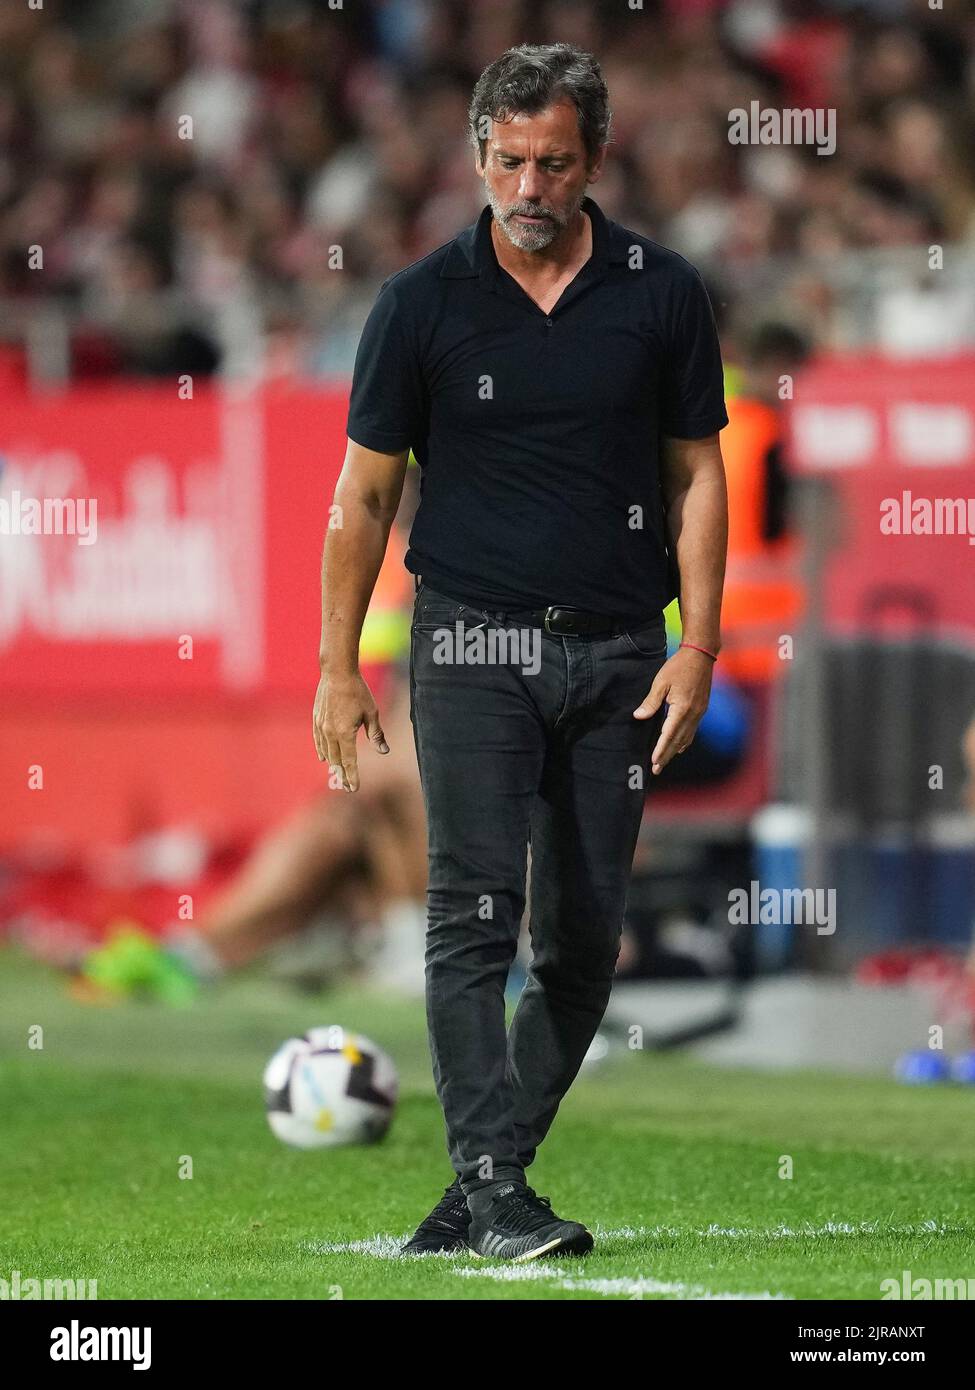 Getafe CF head coach Quique Sanchez Flores during the La Liga match between Girona FC and Getafe CF played at Montilivi Stadium on August 22, 2022 in Girona, Spain. (Photo by Colas Buera / PRESSINPHOTO) Stock Photo